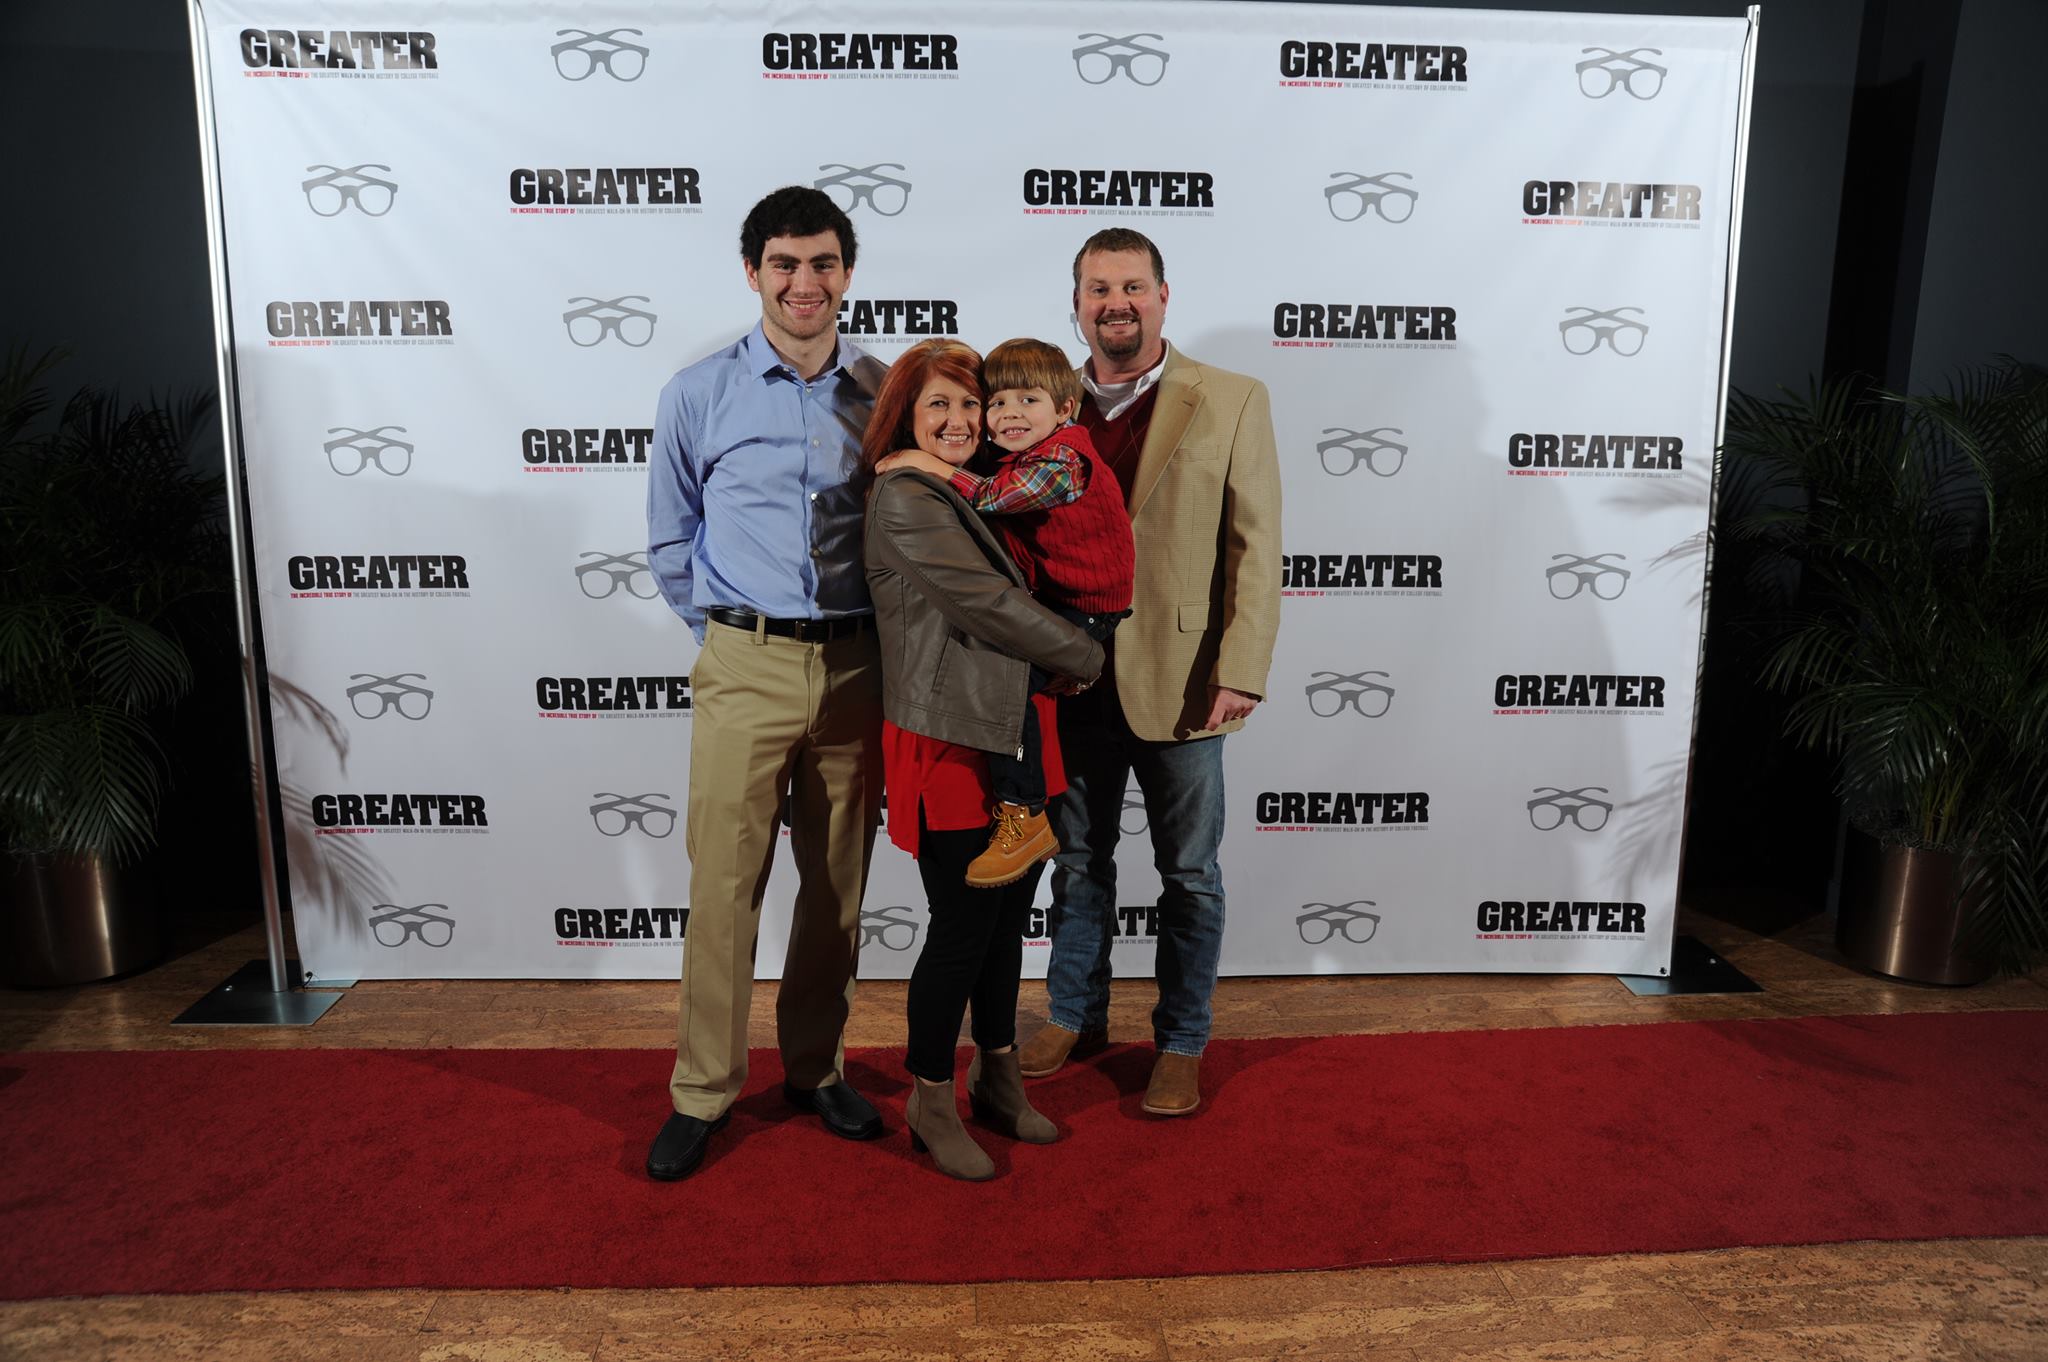 Spencer Rohrscheib, with his parents Cotton & Donna Rohrscheib, alongside Aaron Burlsworth (the character he played in the movie 'GREATER')